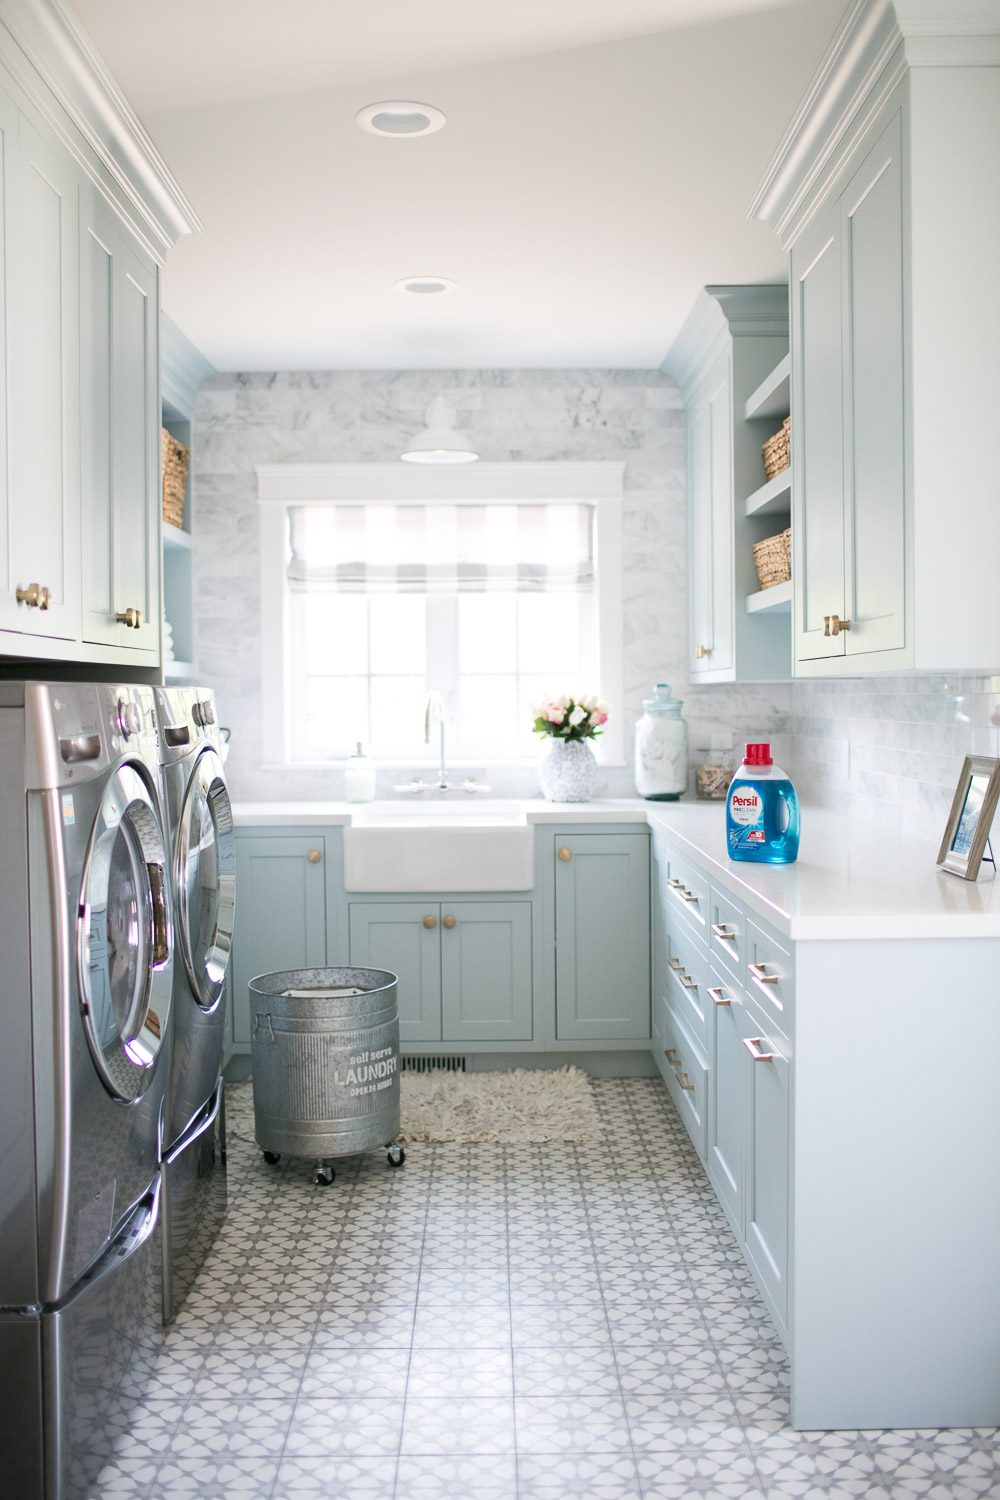 5 Tips for an Innovative Laundry Room